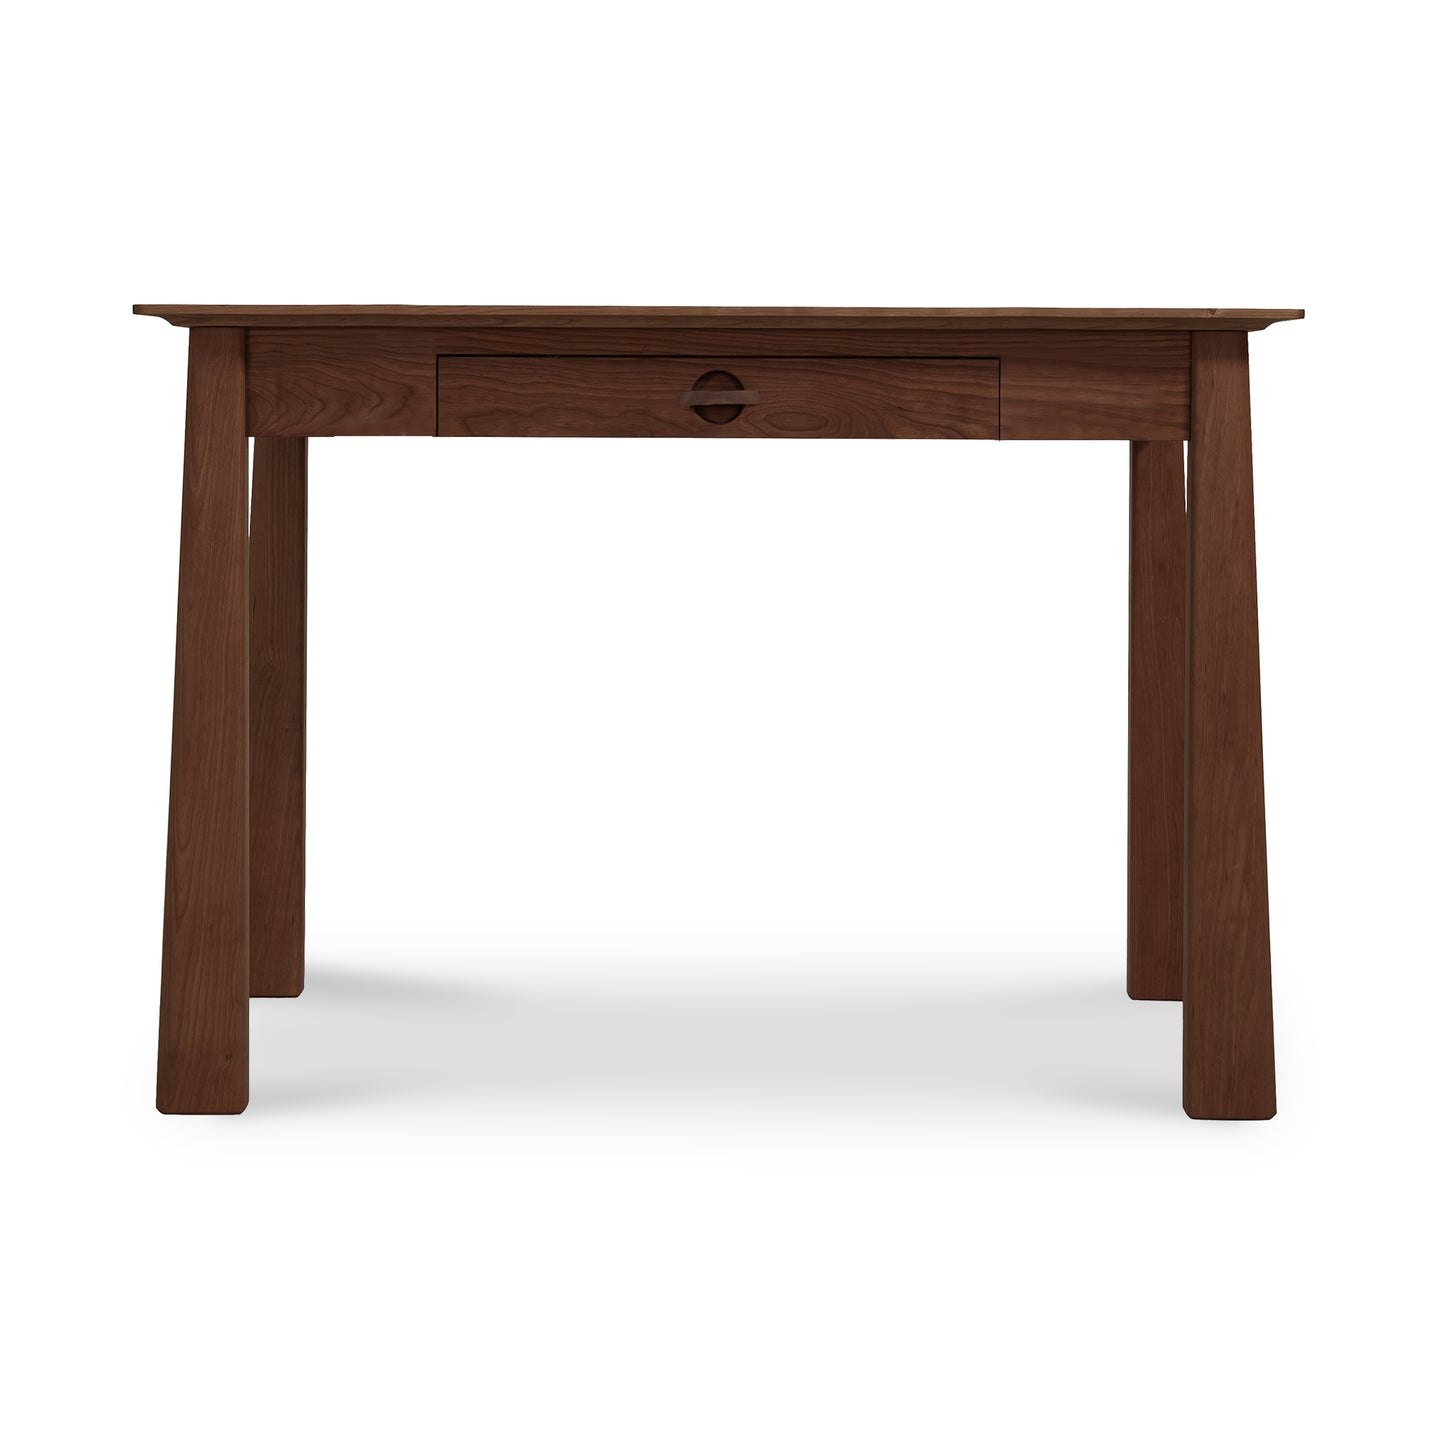 Maple Corner Woodworks' Cherry Moon Writing Desk with a single drawer, pictured against a white background.